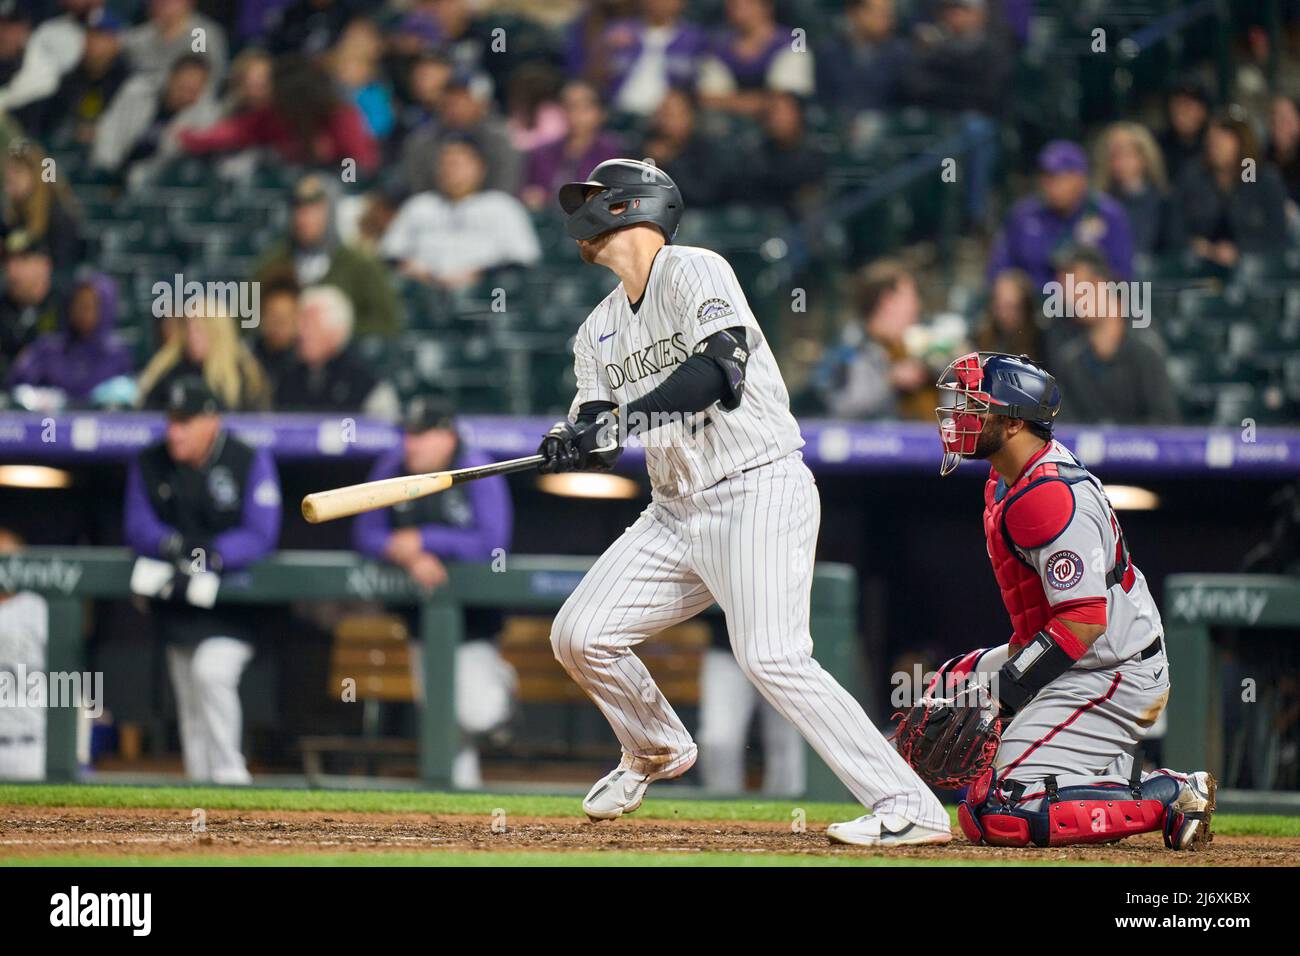 August 16 2021: Colorado first baseman C.J. Cron ((25) hits a walk off home  run during the game with San Diego Padres and Colorado Rockies held at  Coors Field in Denver Co.